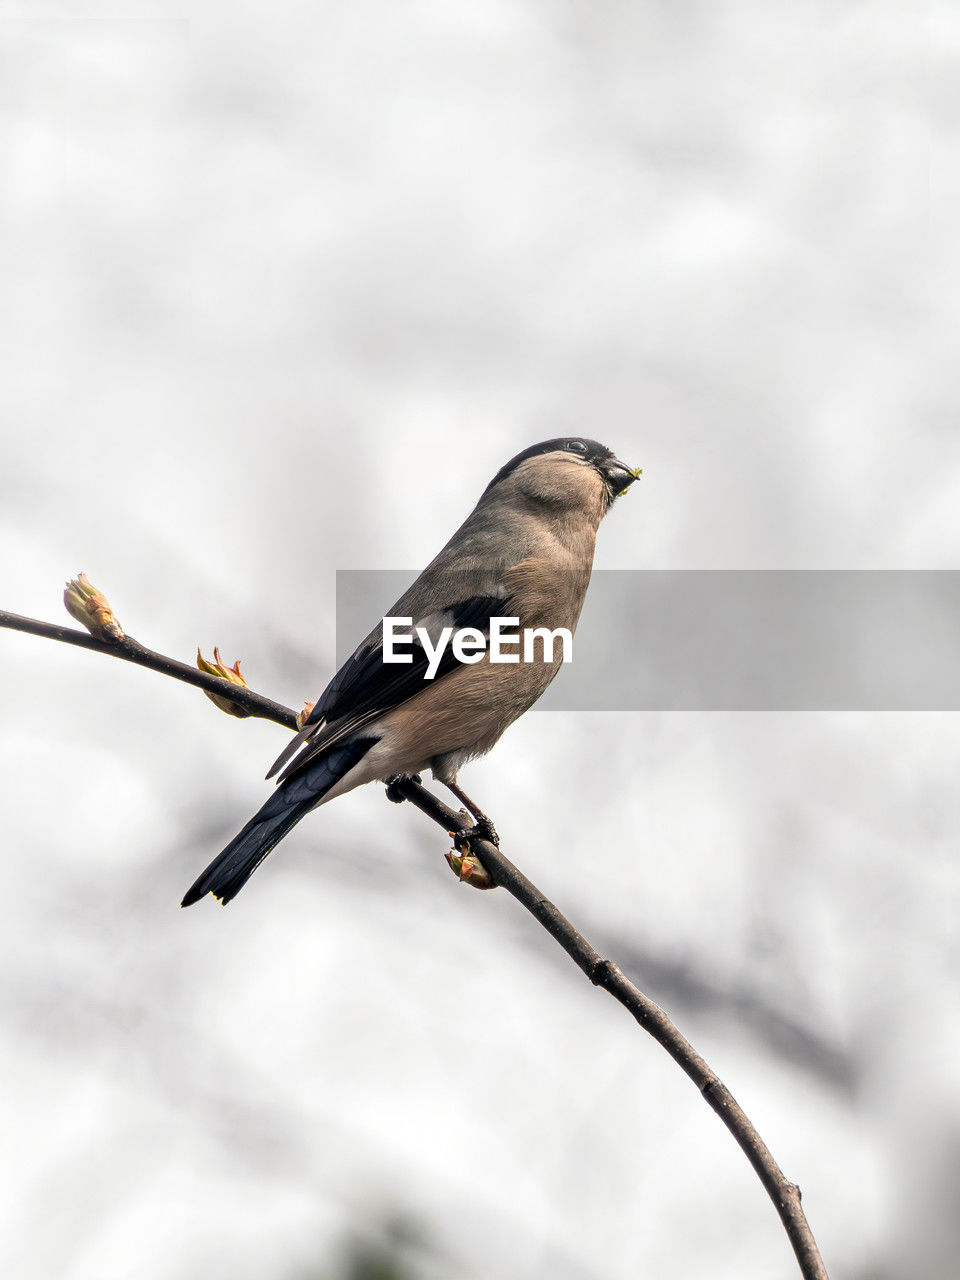 bird, animal wildlife, animal themes, animal, wildlife, one animal, perching, branch, beak, nature, focus on foreground, tree, close-up, full length, no people, beauty in nature, plant, outdoors, songbird, day, selective focus, winter, copy space, environment, sky, side view, pattern, outdoor pursuit